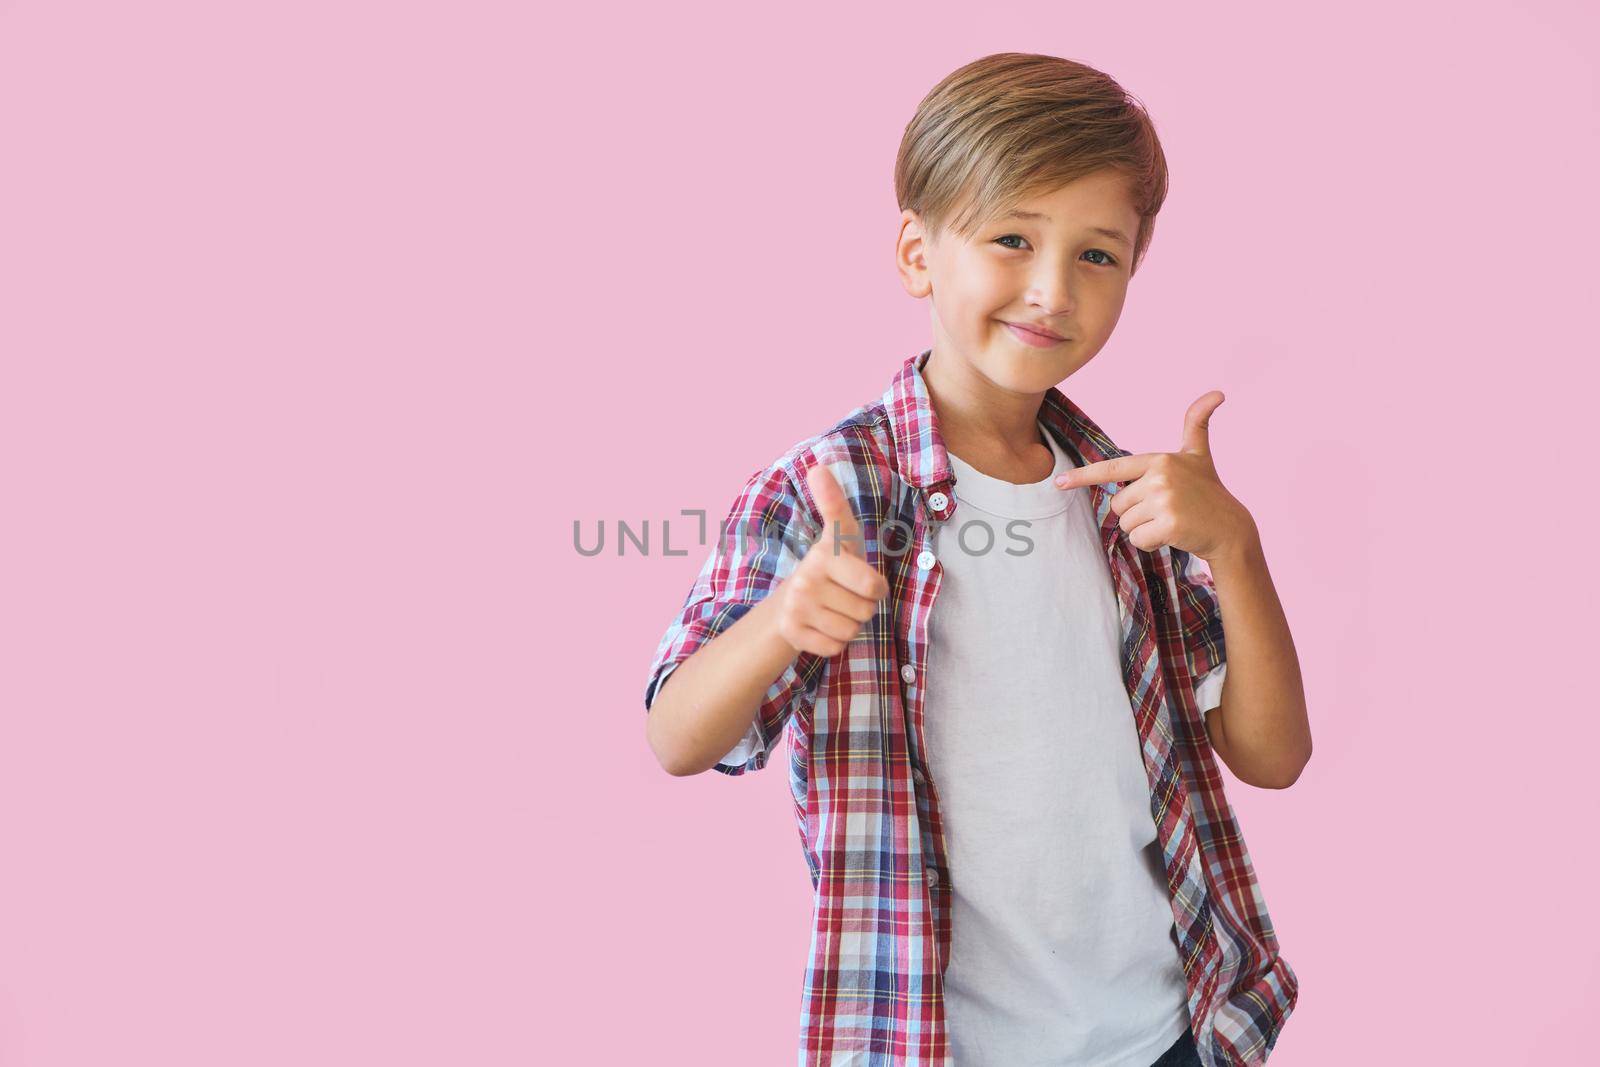 Young happy boy points to his clothes with thumb up, isolated on pink background with copy space. Blank white t-shirt for your design